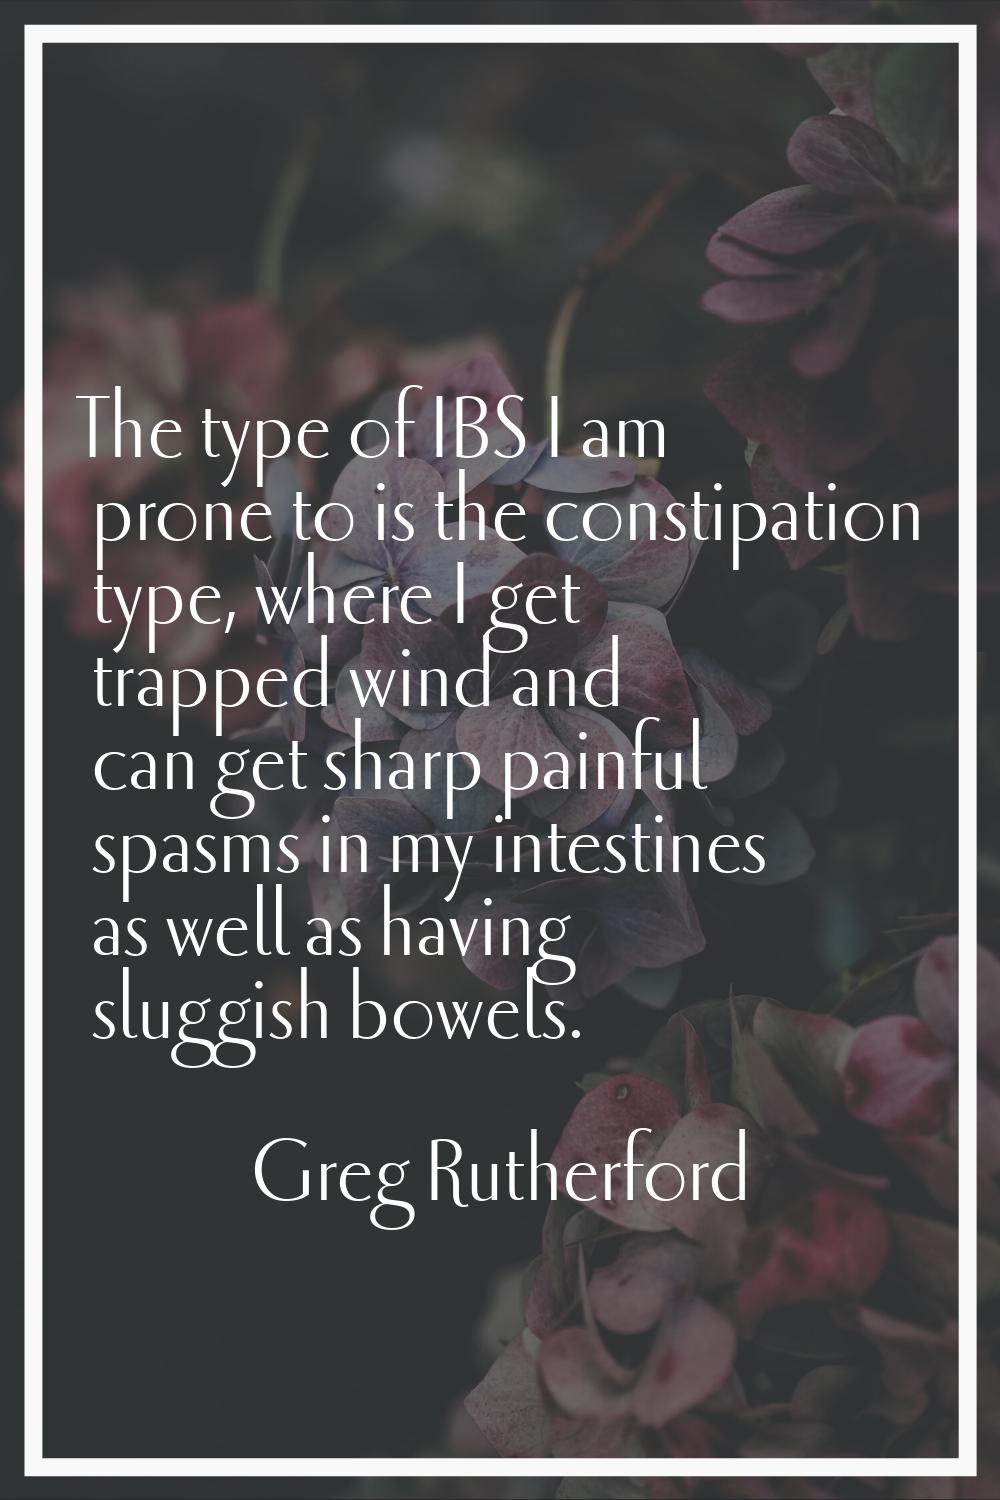 The type of IBS I am prone to is the constipation type, where I get trapped wind and can get sharp 